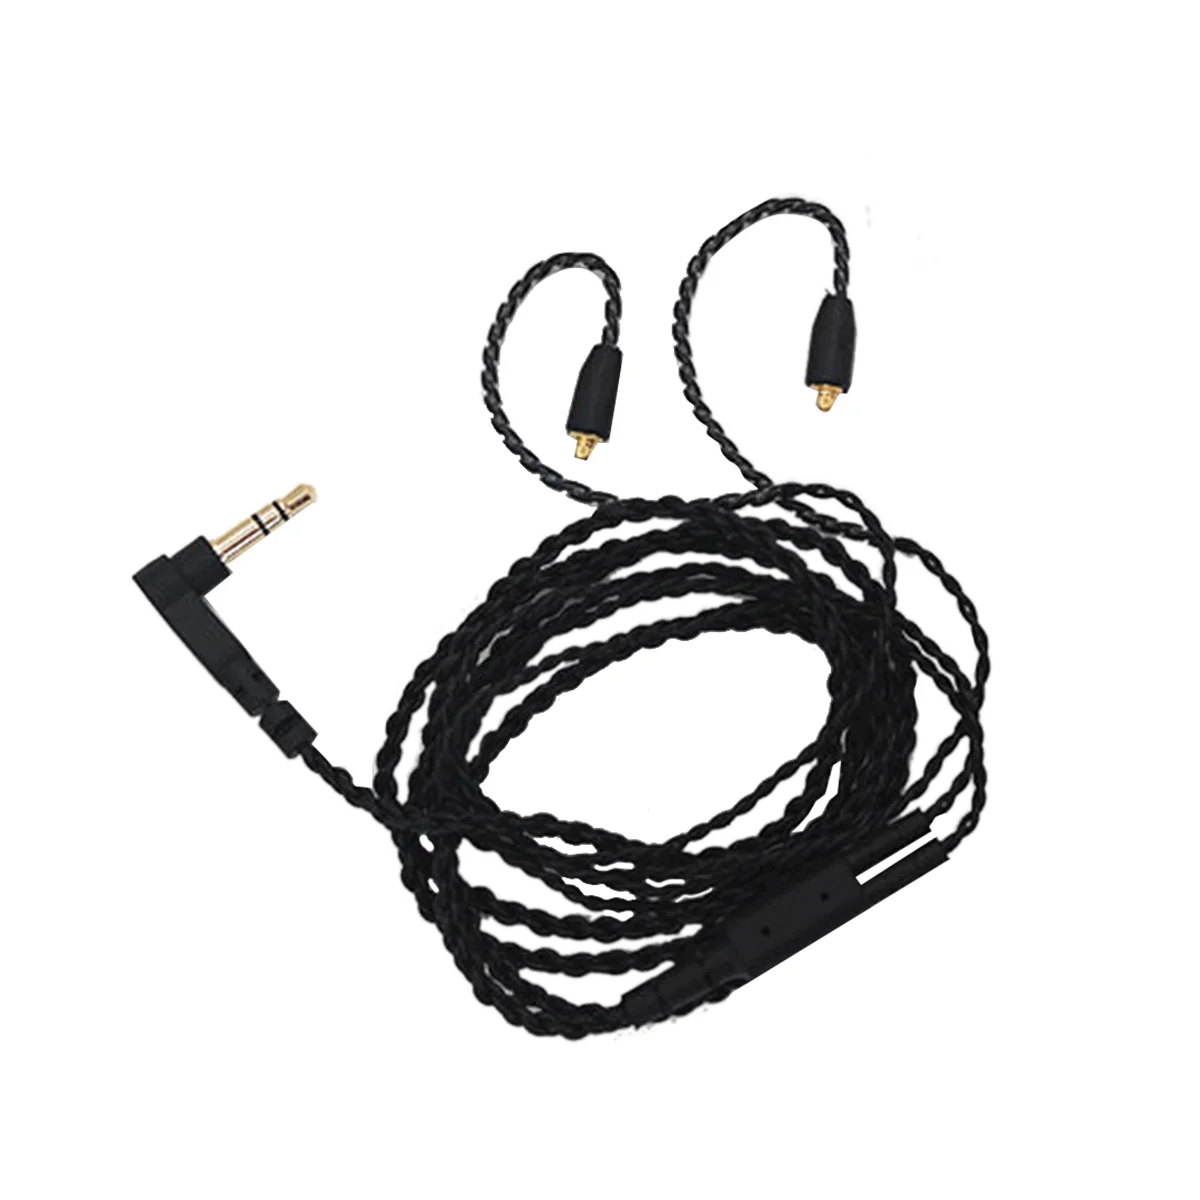 

3.5mm MMCX Cable Cords for Shure SE215 SE315 SE535 SE846 Earphones Tangle-Free Audio Devices Wires